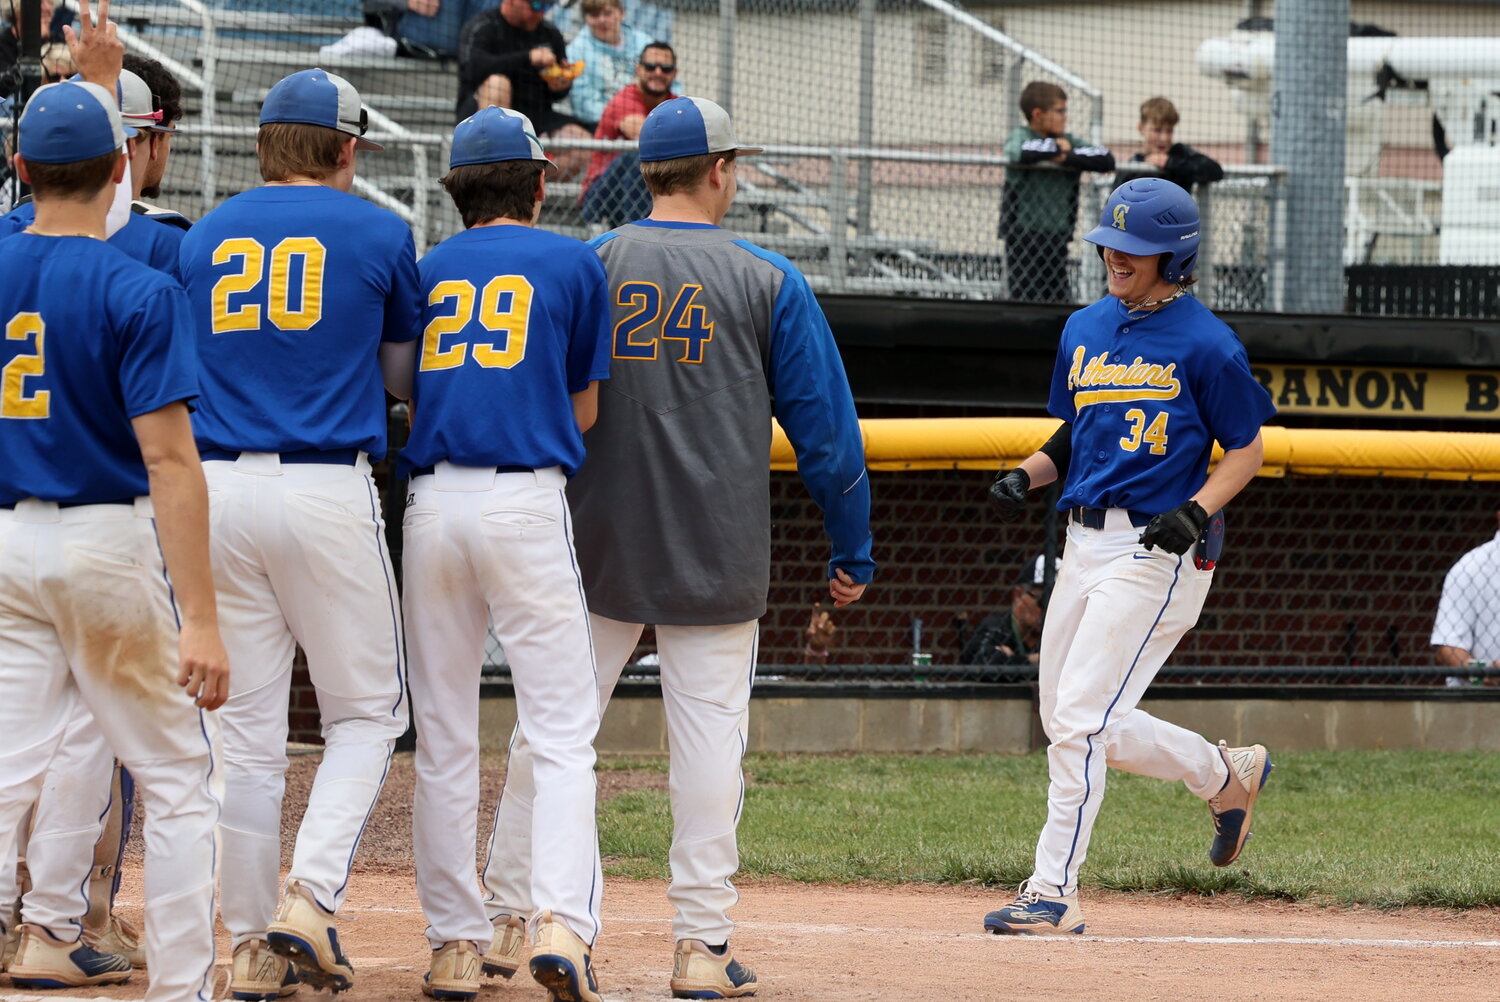 Junior Bryce Dowell launched a 2R HR in the first inning to help Crawfordsville defeat Lebanon 8-5 on Saturday.